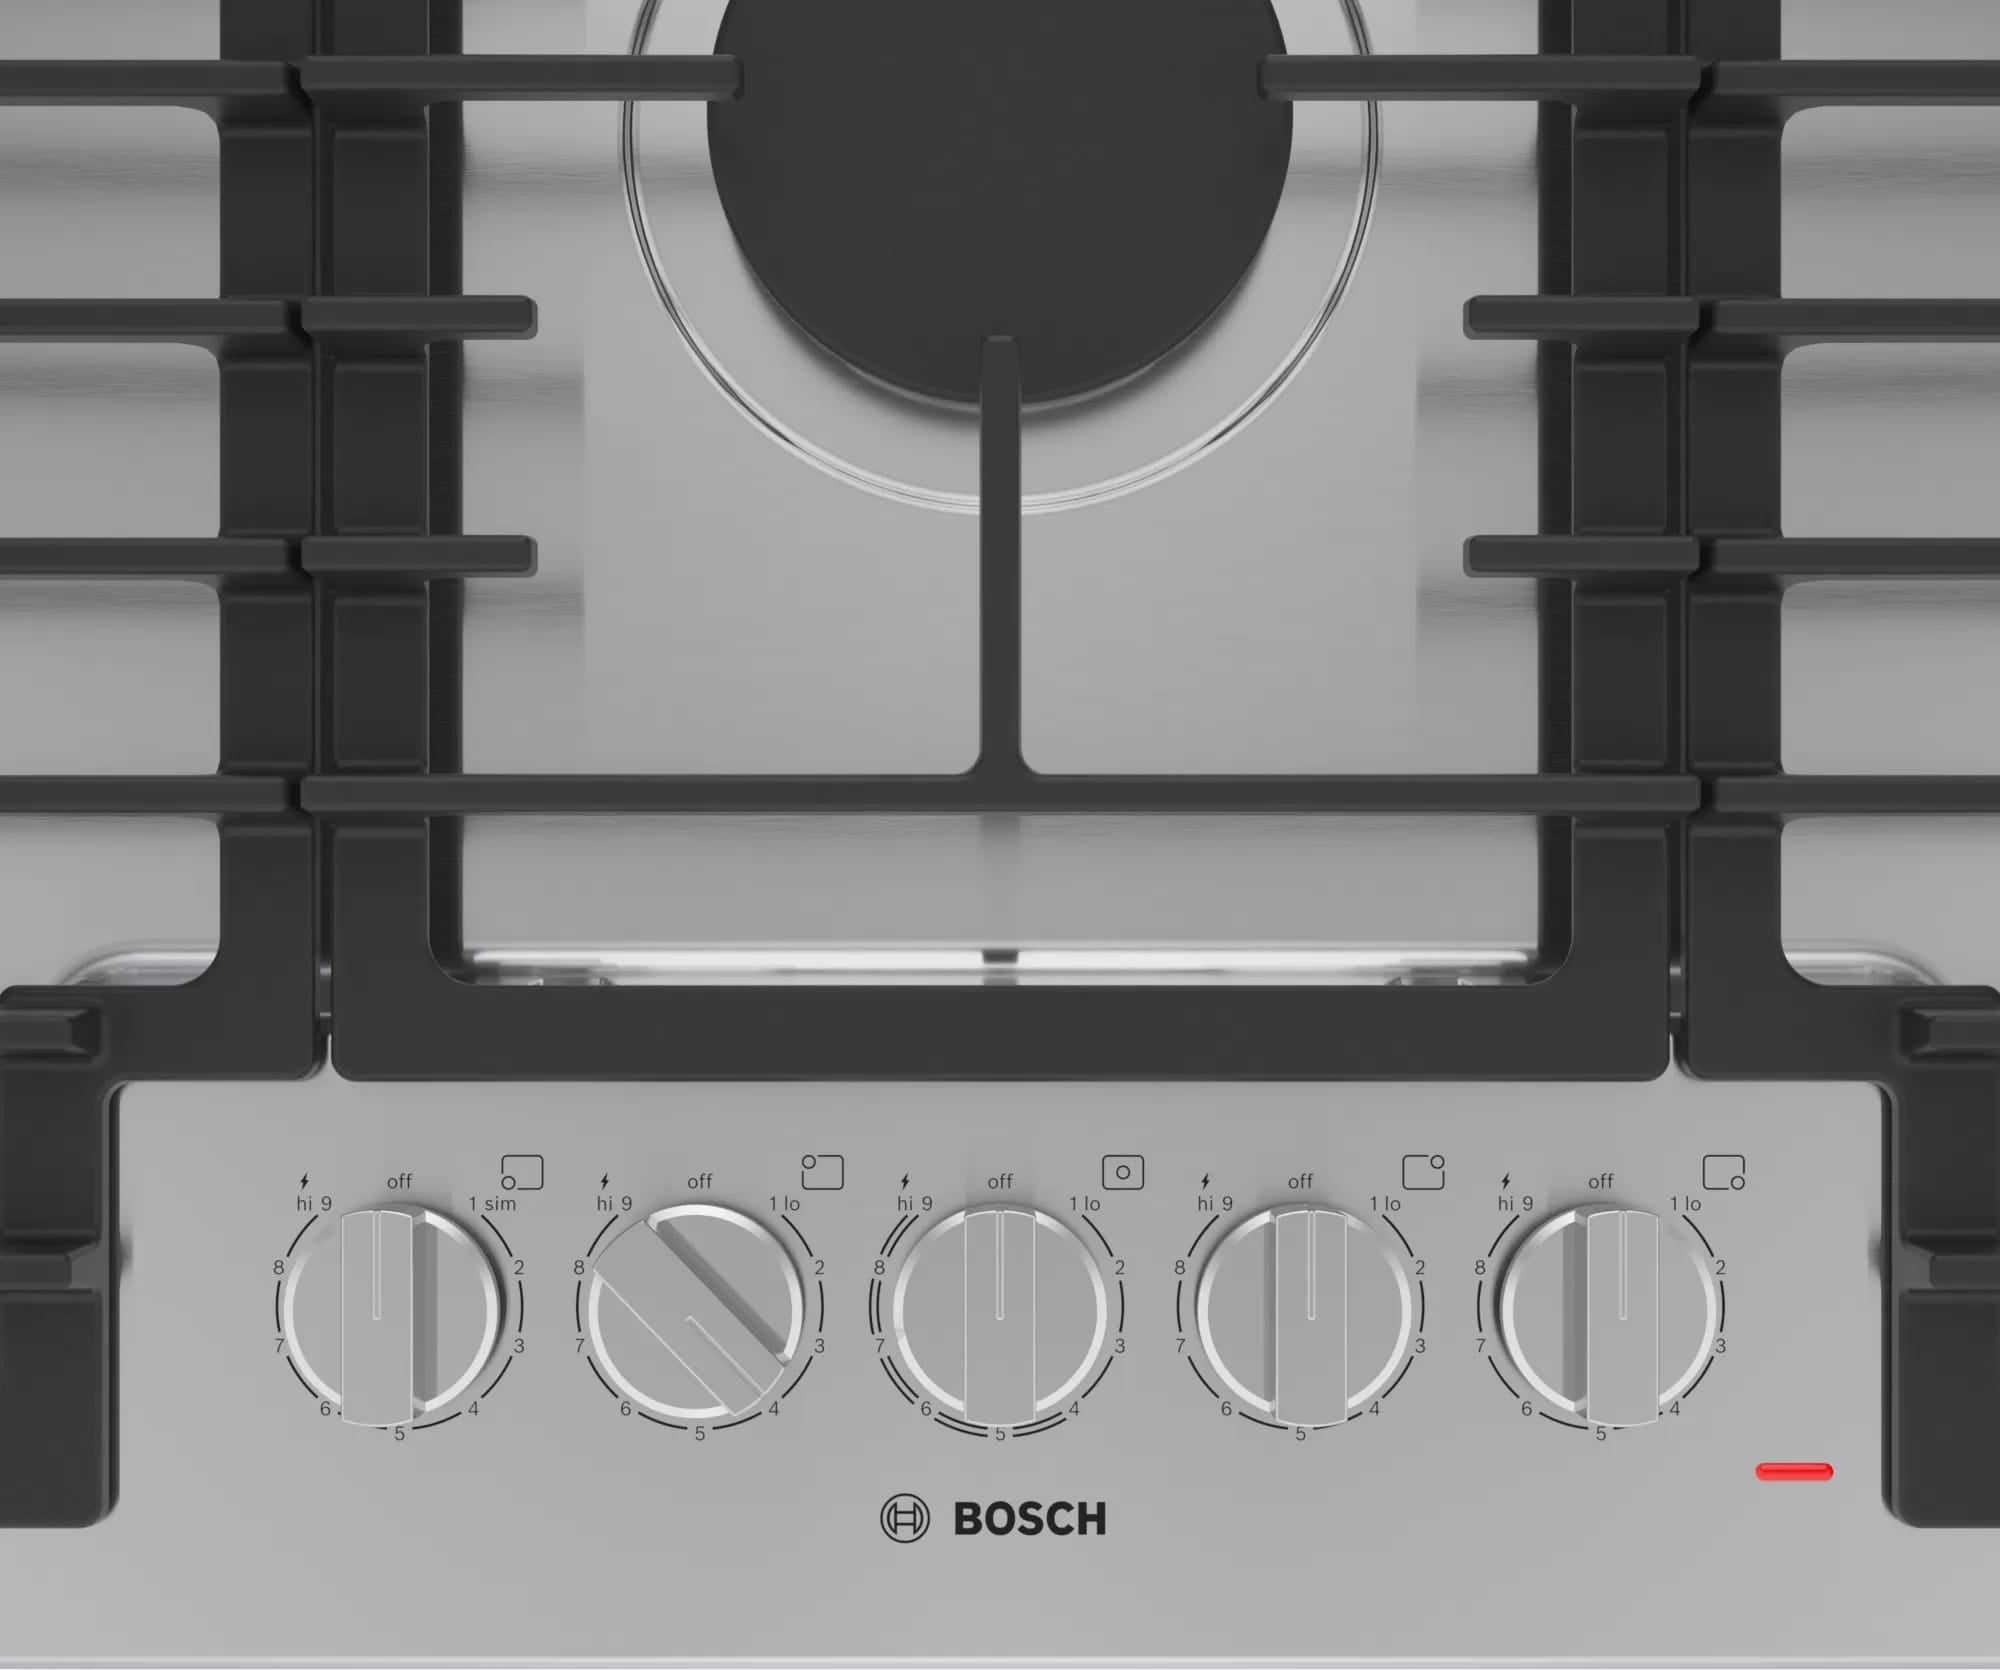 Bosch - 37 inch wide Gas Cooktop in Stainless - NGM5658UC